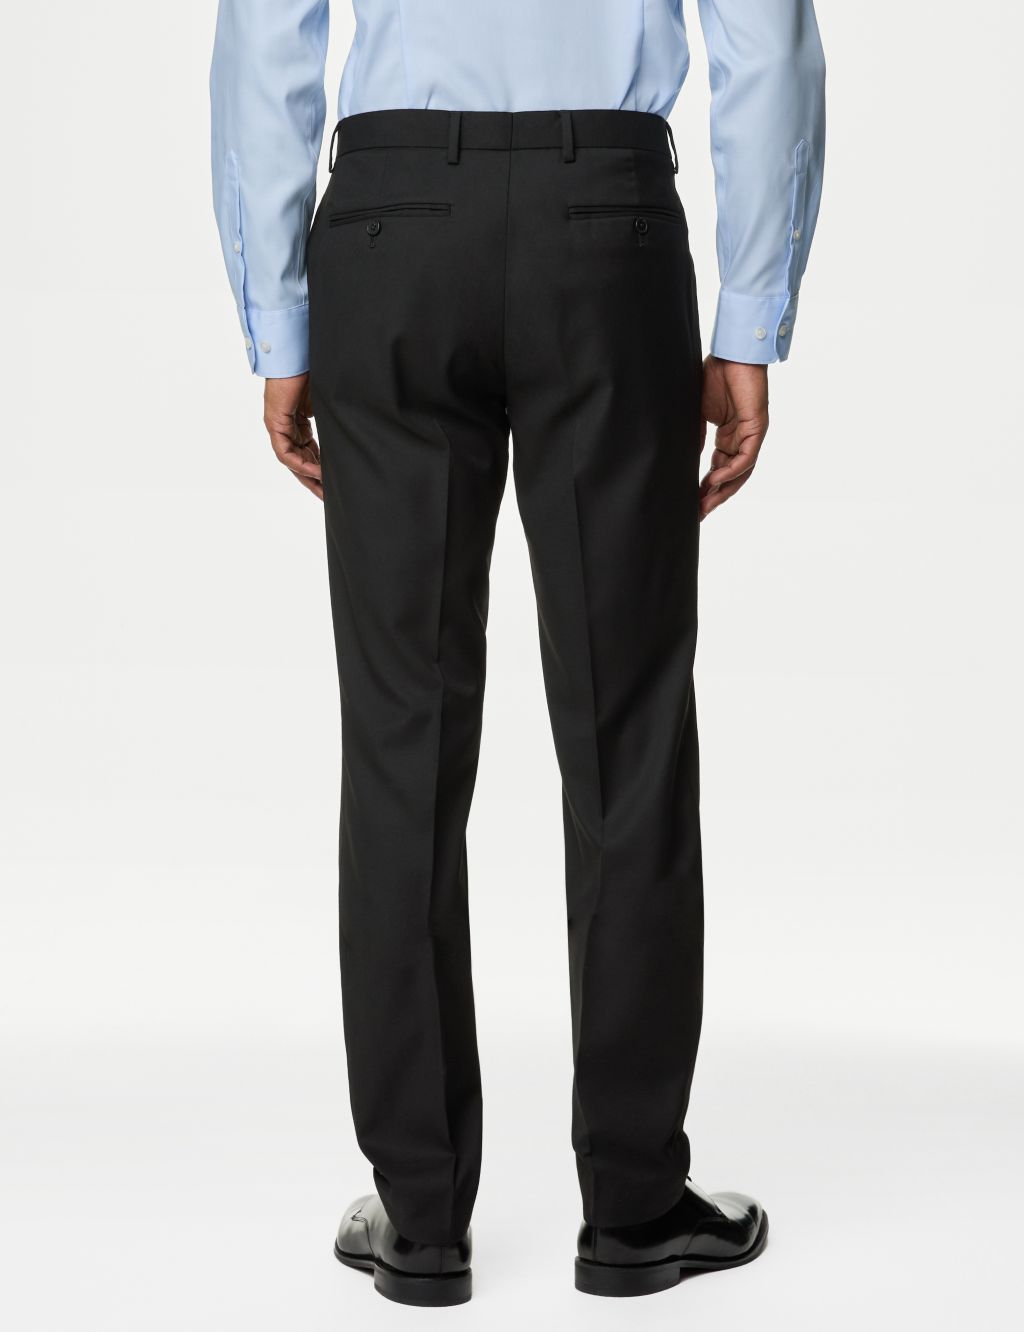 Slim Fit Stretch Suit Trousers image 4